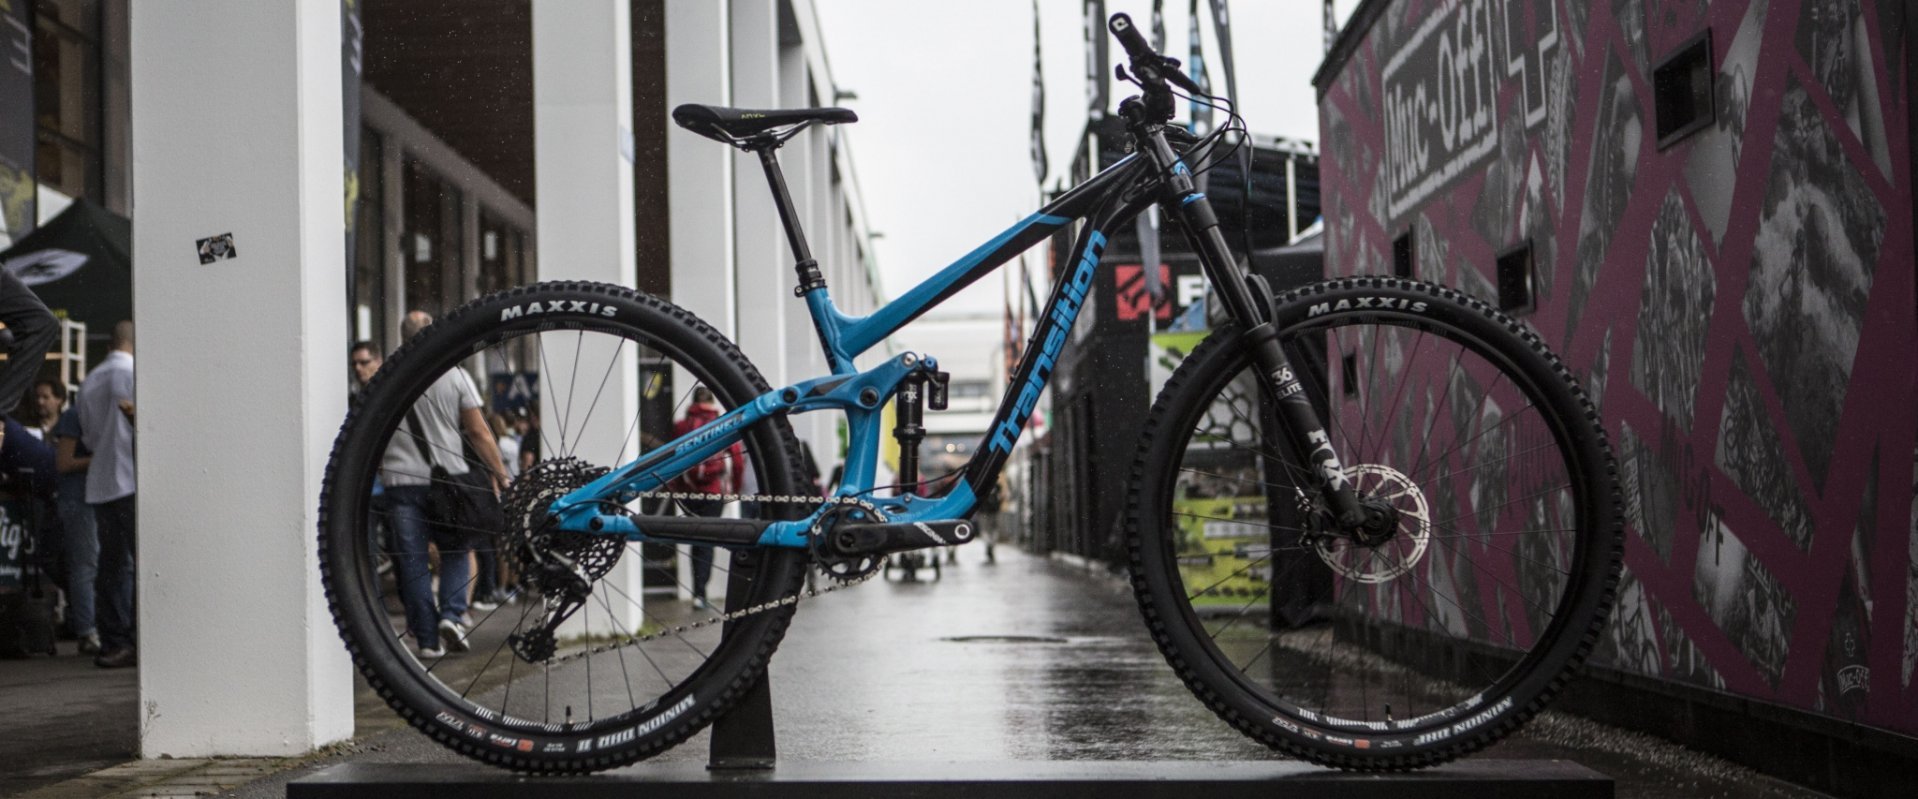 The all new Sentinel on 29er wheels. The Transition guys from south of the (Canadian) border put a nice rig together.